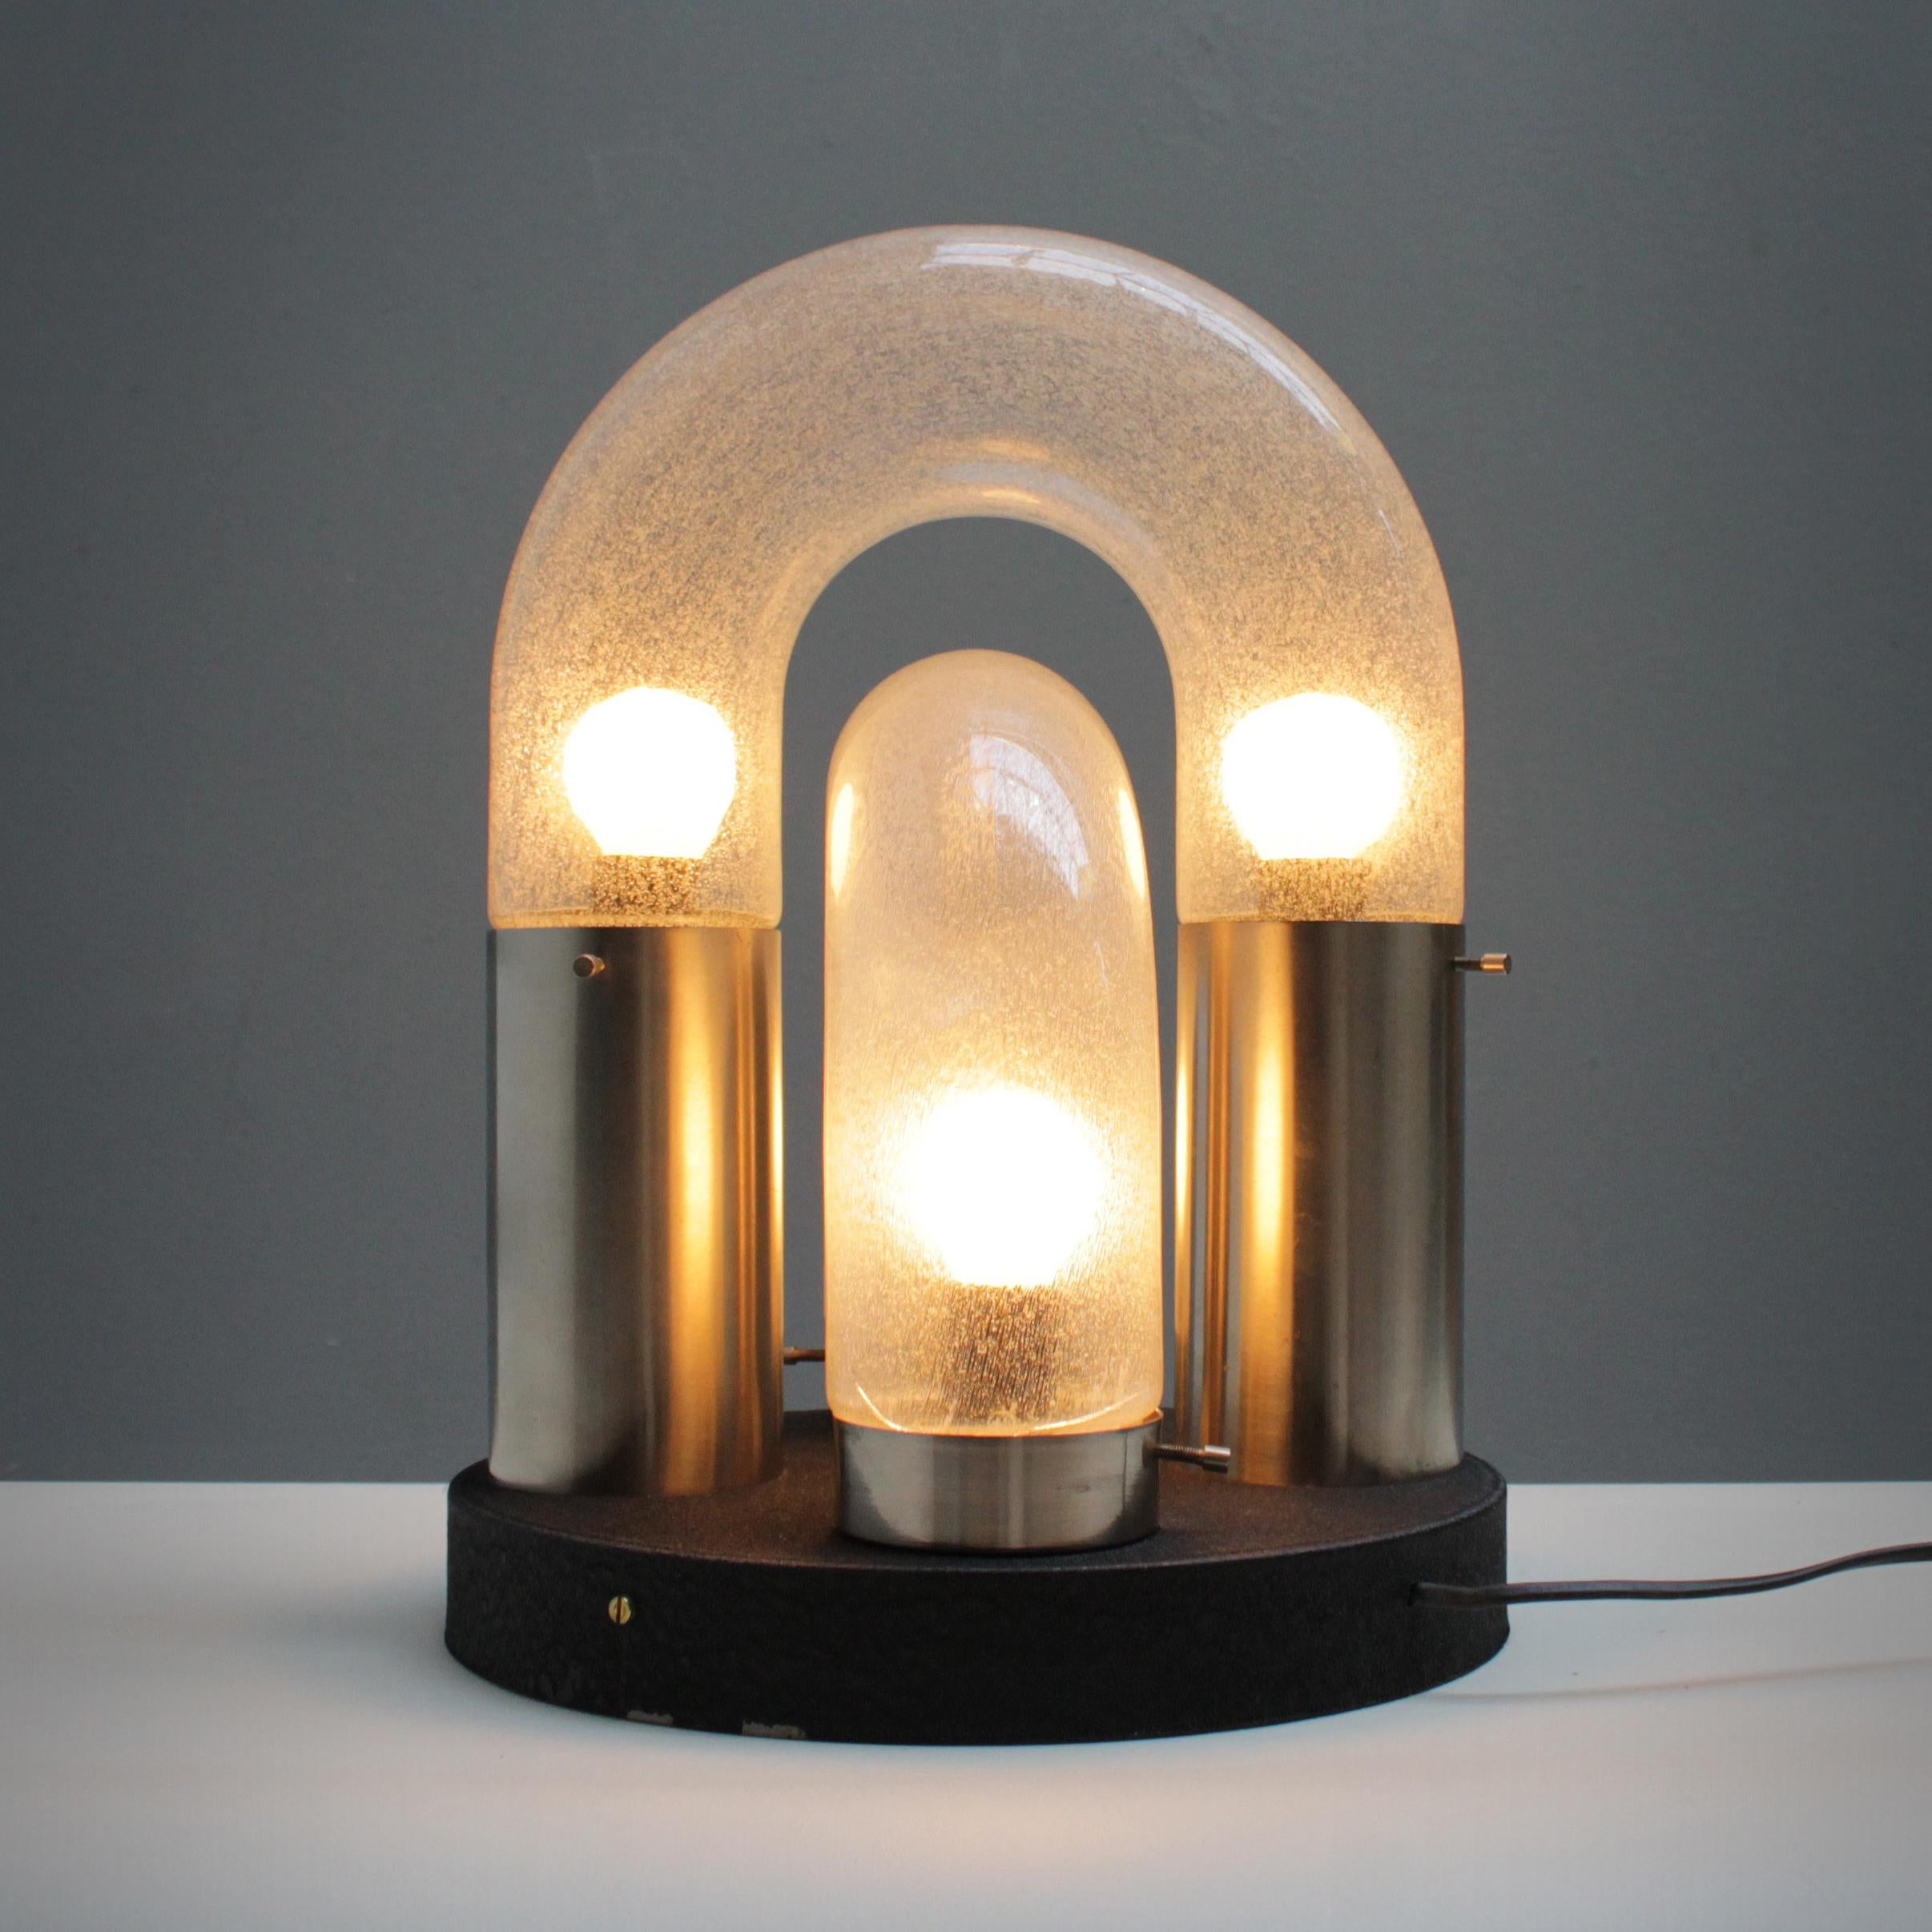 Table light by Carlo Nason and manufactured in the 1960s by Mazzega, Italy. Two curved glass tubes of Murano glass. Metal base with black crackled lacquer and chrome holders.
Four bulbs (E17 14-17 mm), small Edison screw (SES) of max 40 watt, the